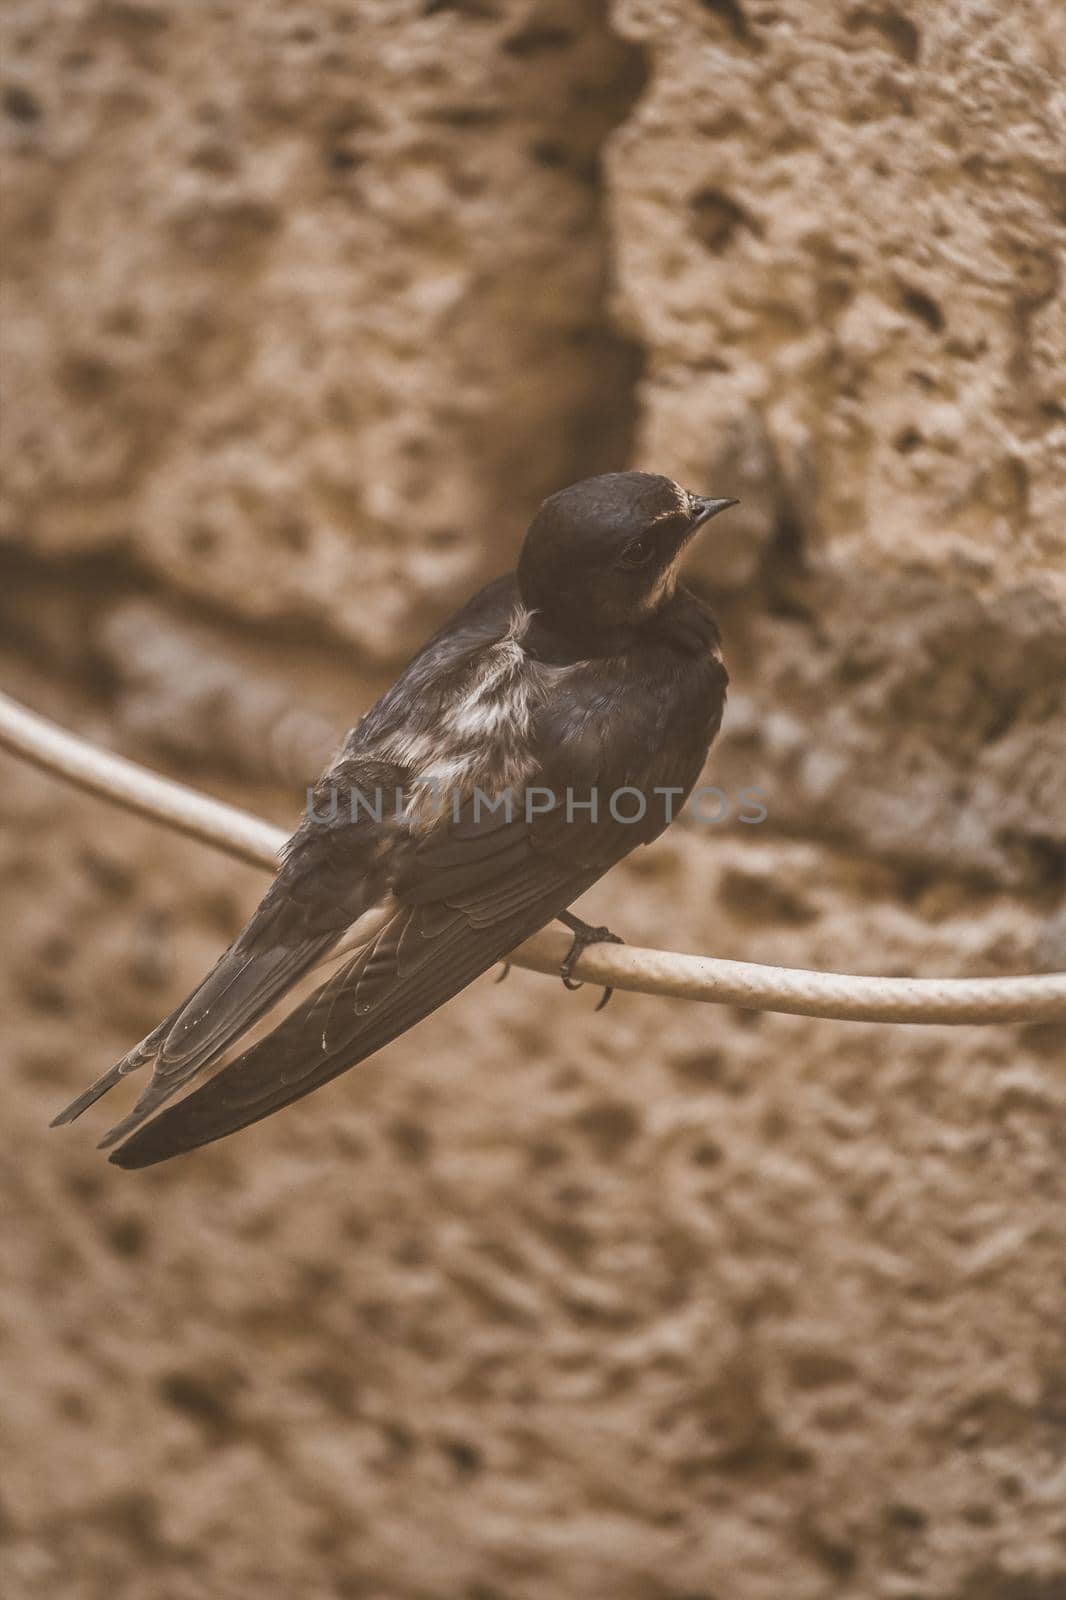 Swallow bird sits on a wire against the background of a brick shell, animals and wildlife, close-up.